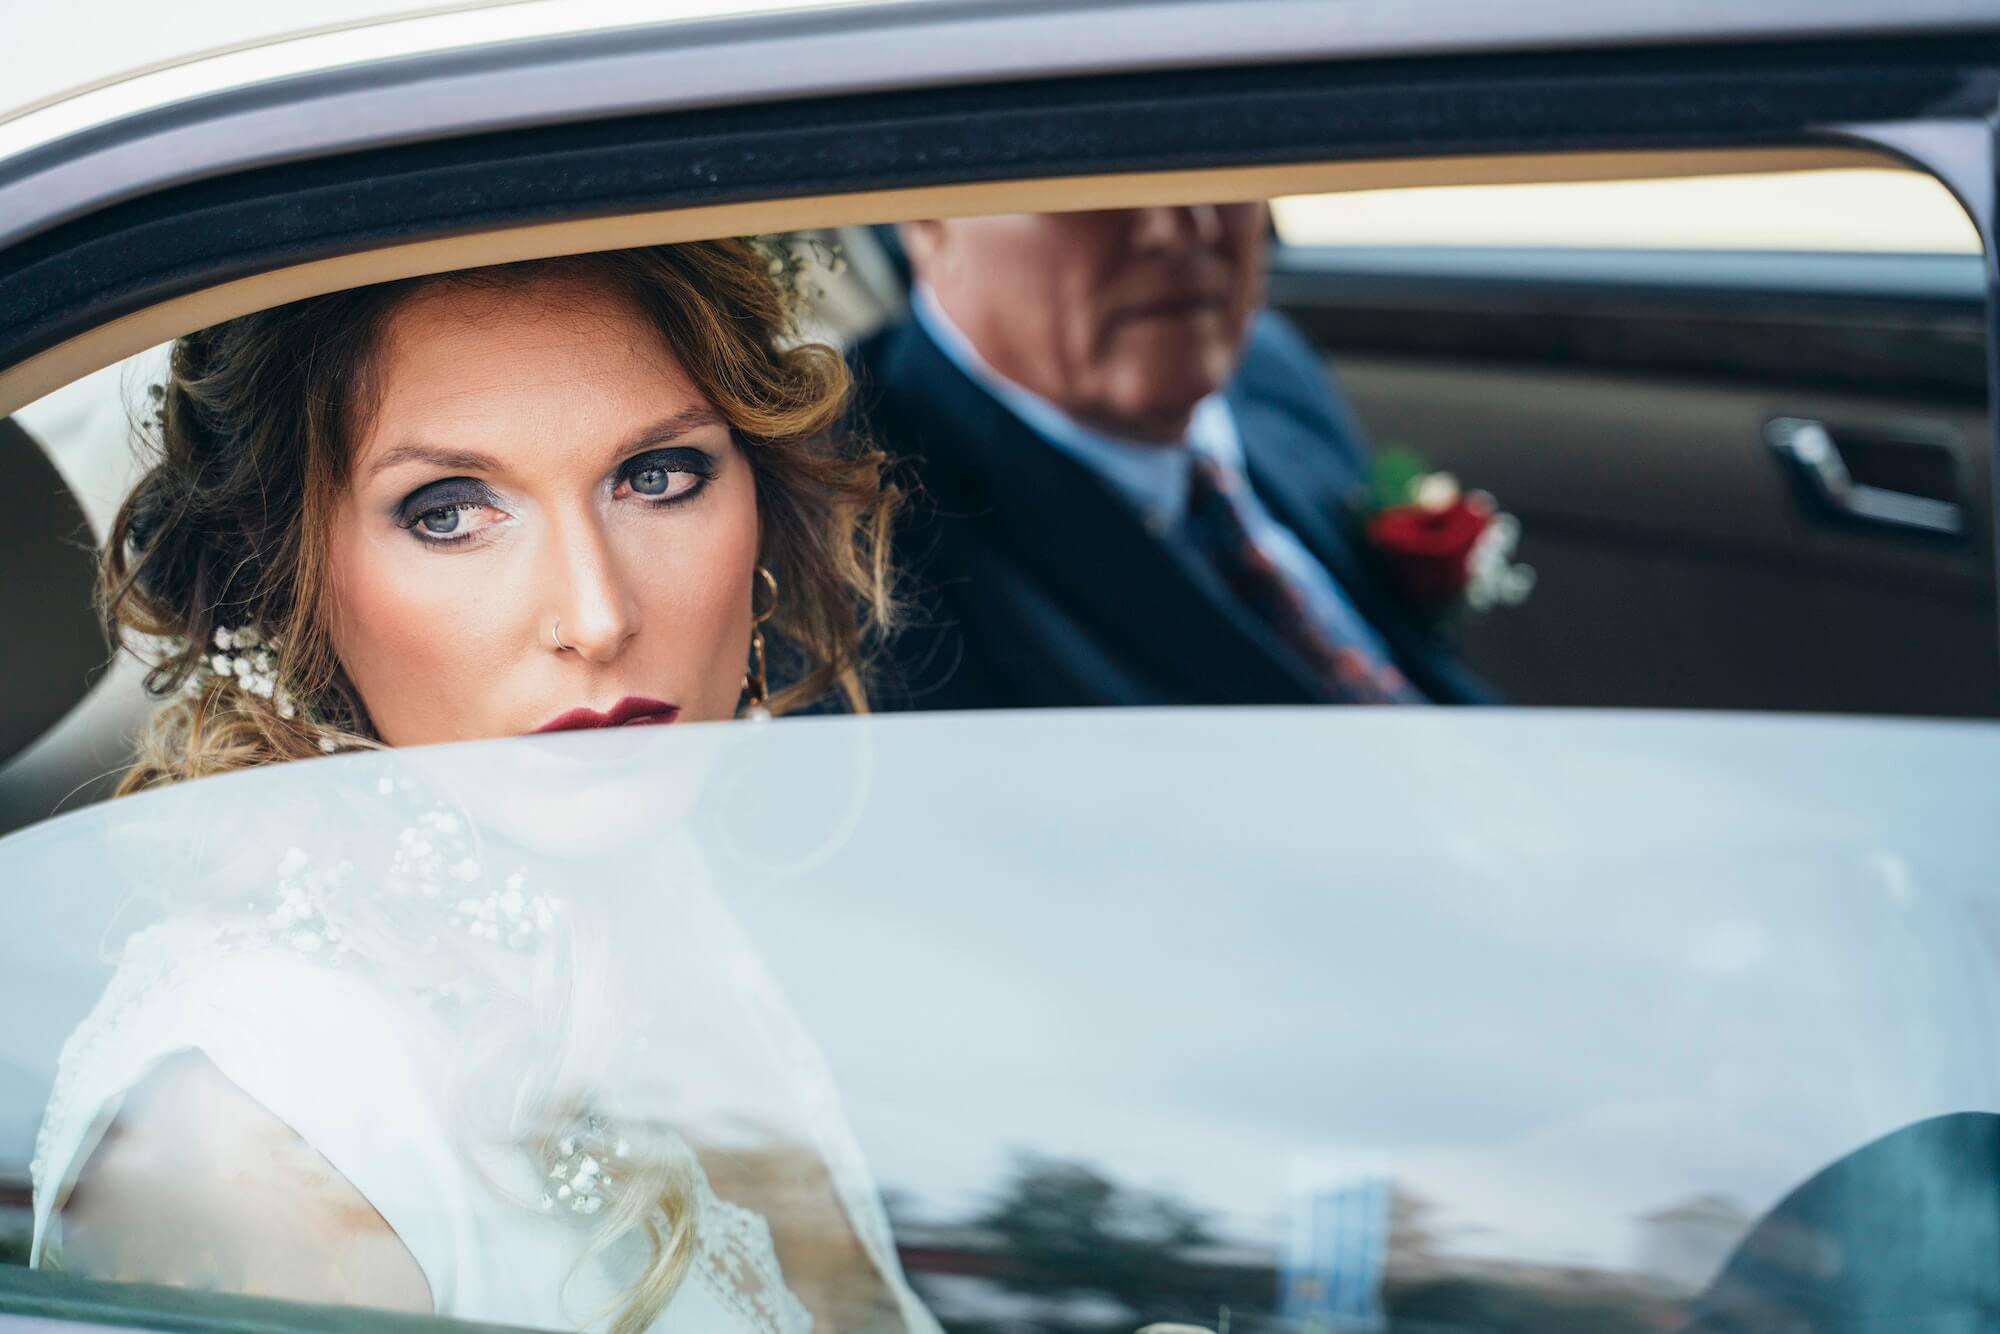 the bride arriving to the wedding by car.